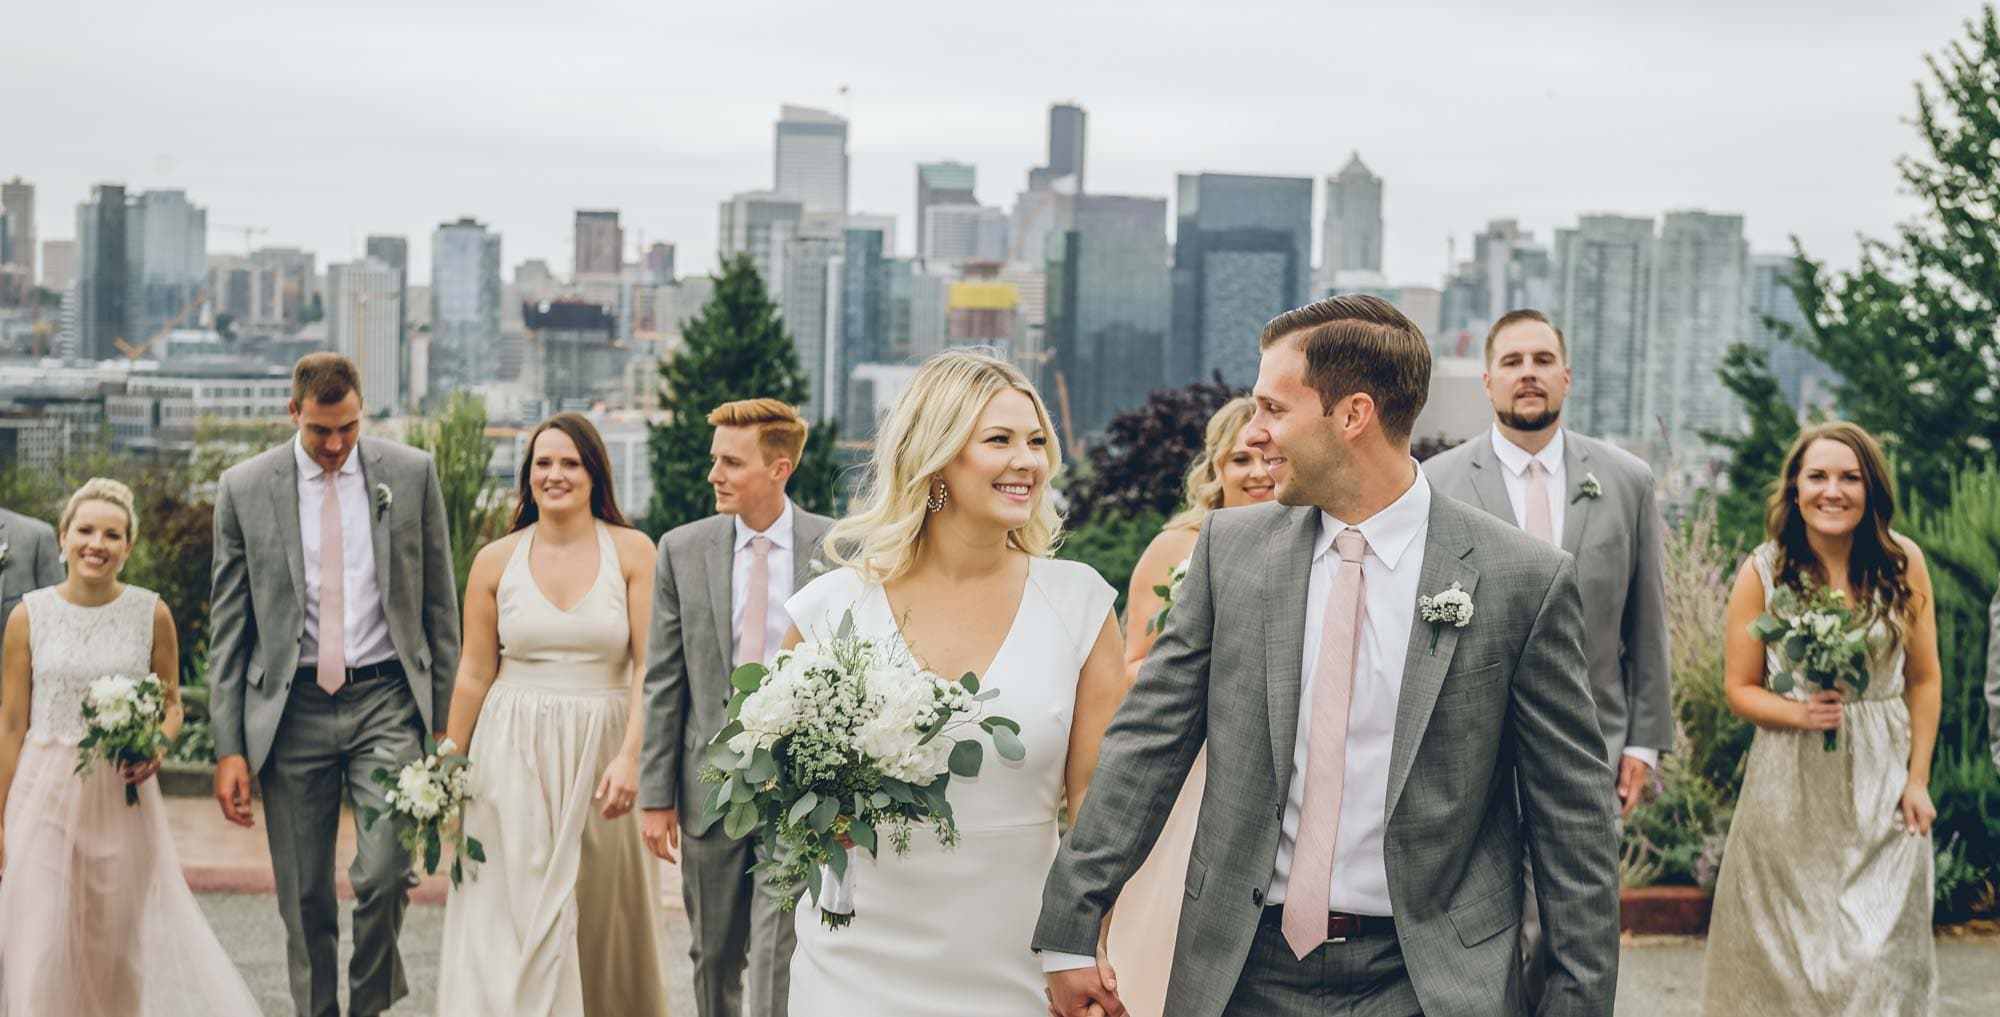 bridal party walking downtown seattle, photographed by Eivan's in Seattle.